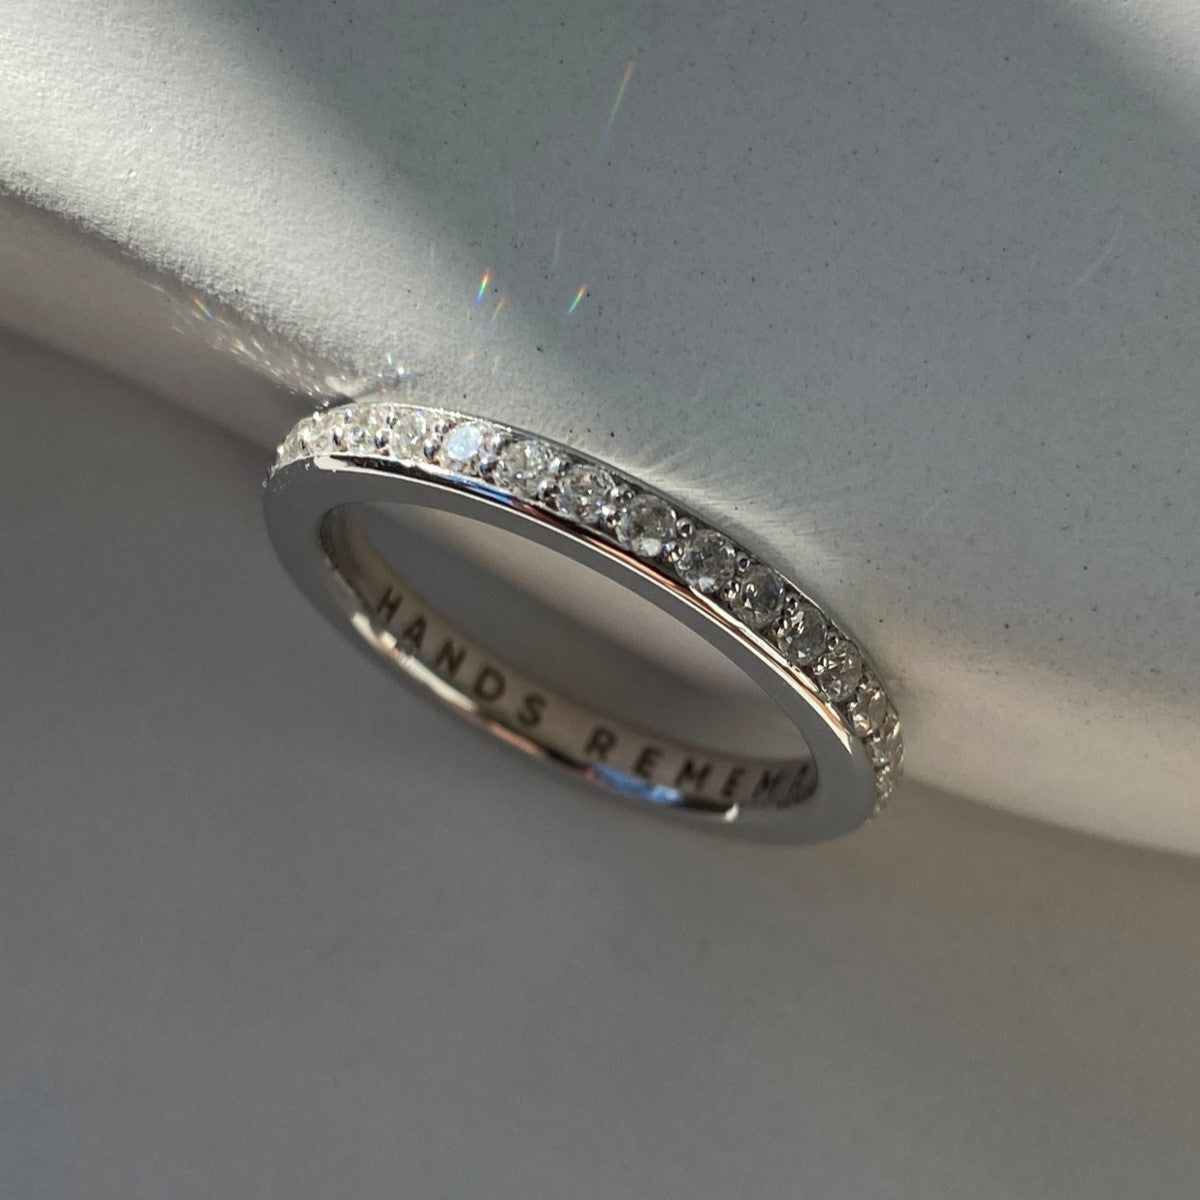 RING "MEMORIES" WITH A FULL CIRCLE OF MOISSANITE | SOLID GOLD